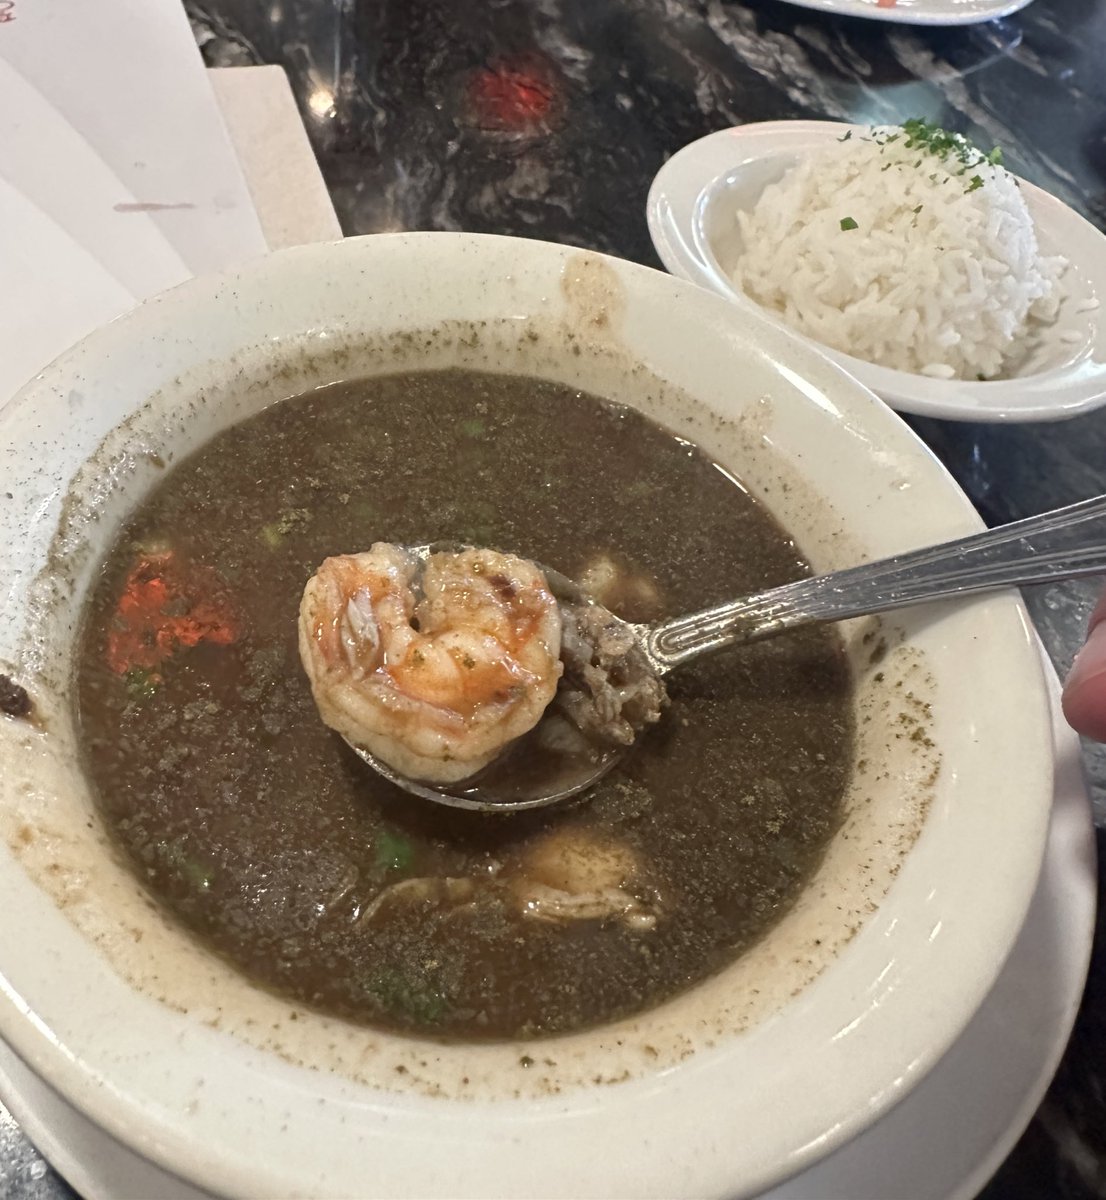 Gumbo in Galveston at Willie G’s. Who has the best gumbo in Galveston?